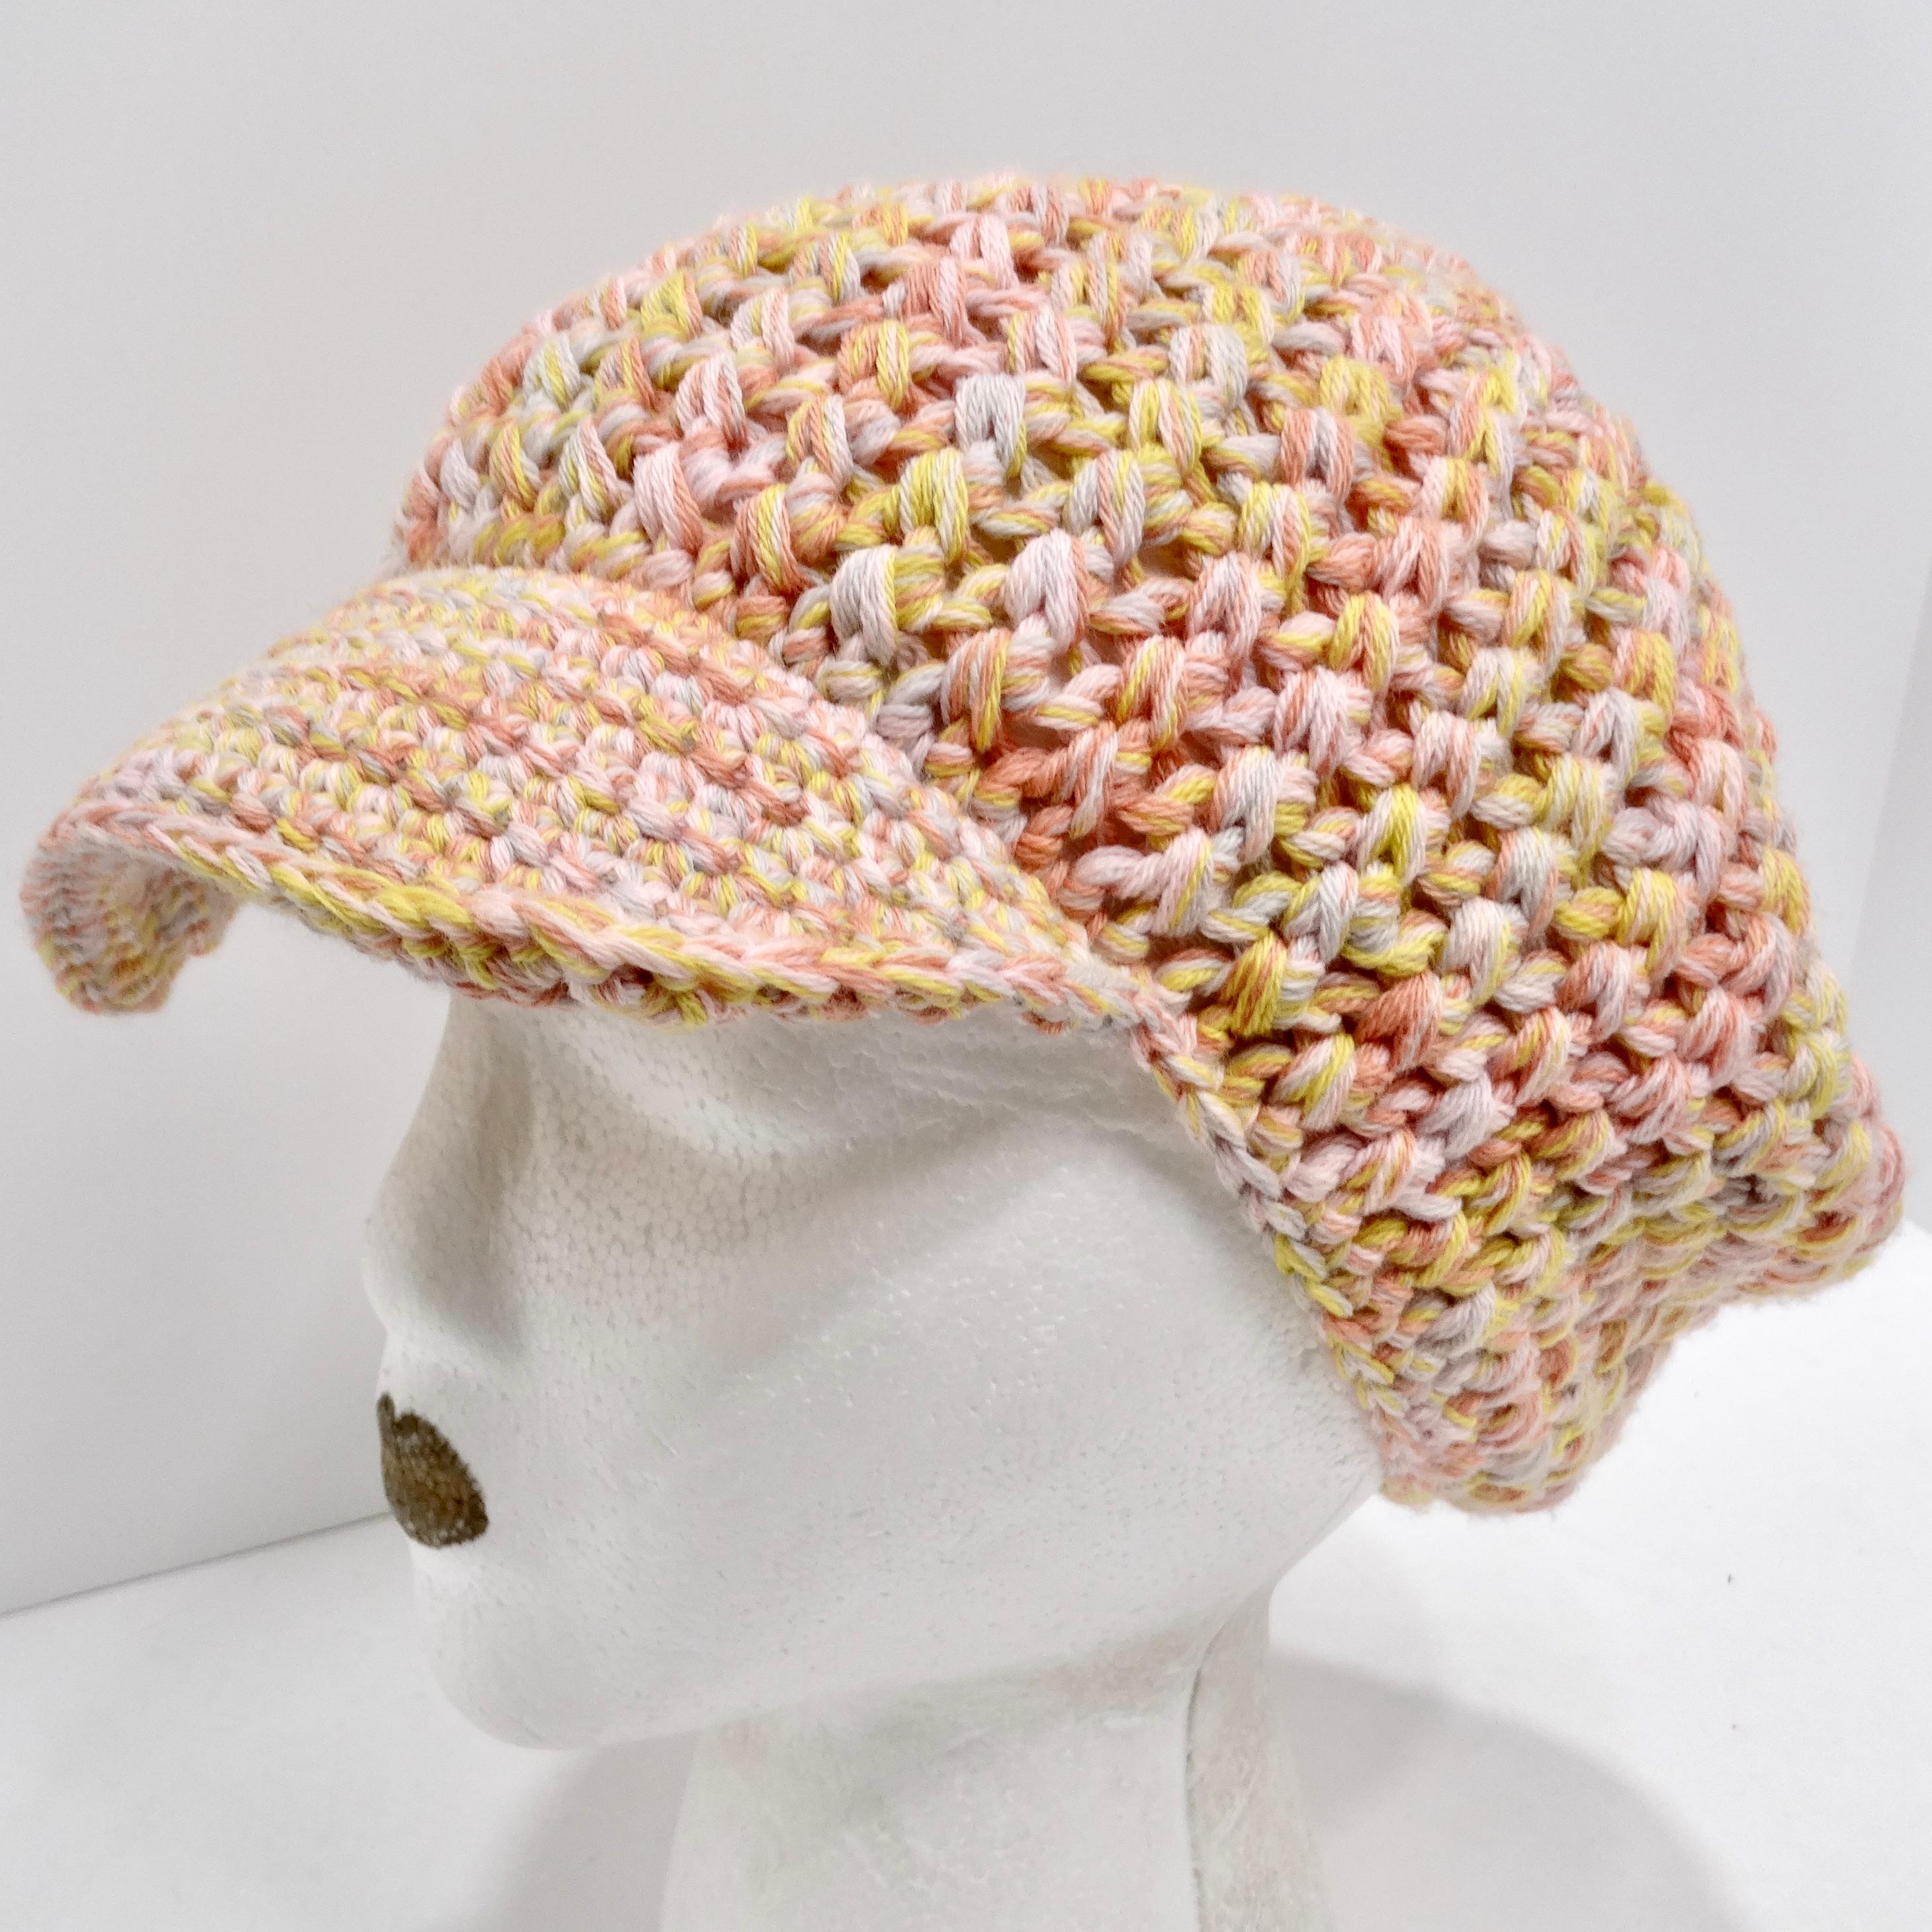 Do not miss out on the Missoni 1970s Multicolor Knit Hat—a super fun and unique accessory that effortlessly channels the vibrant and carefree spirit of the 1970s. This knit hat isn't just headwear; it's a fashion statement crafted with a playful nod